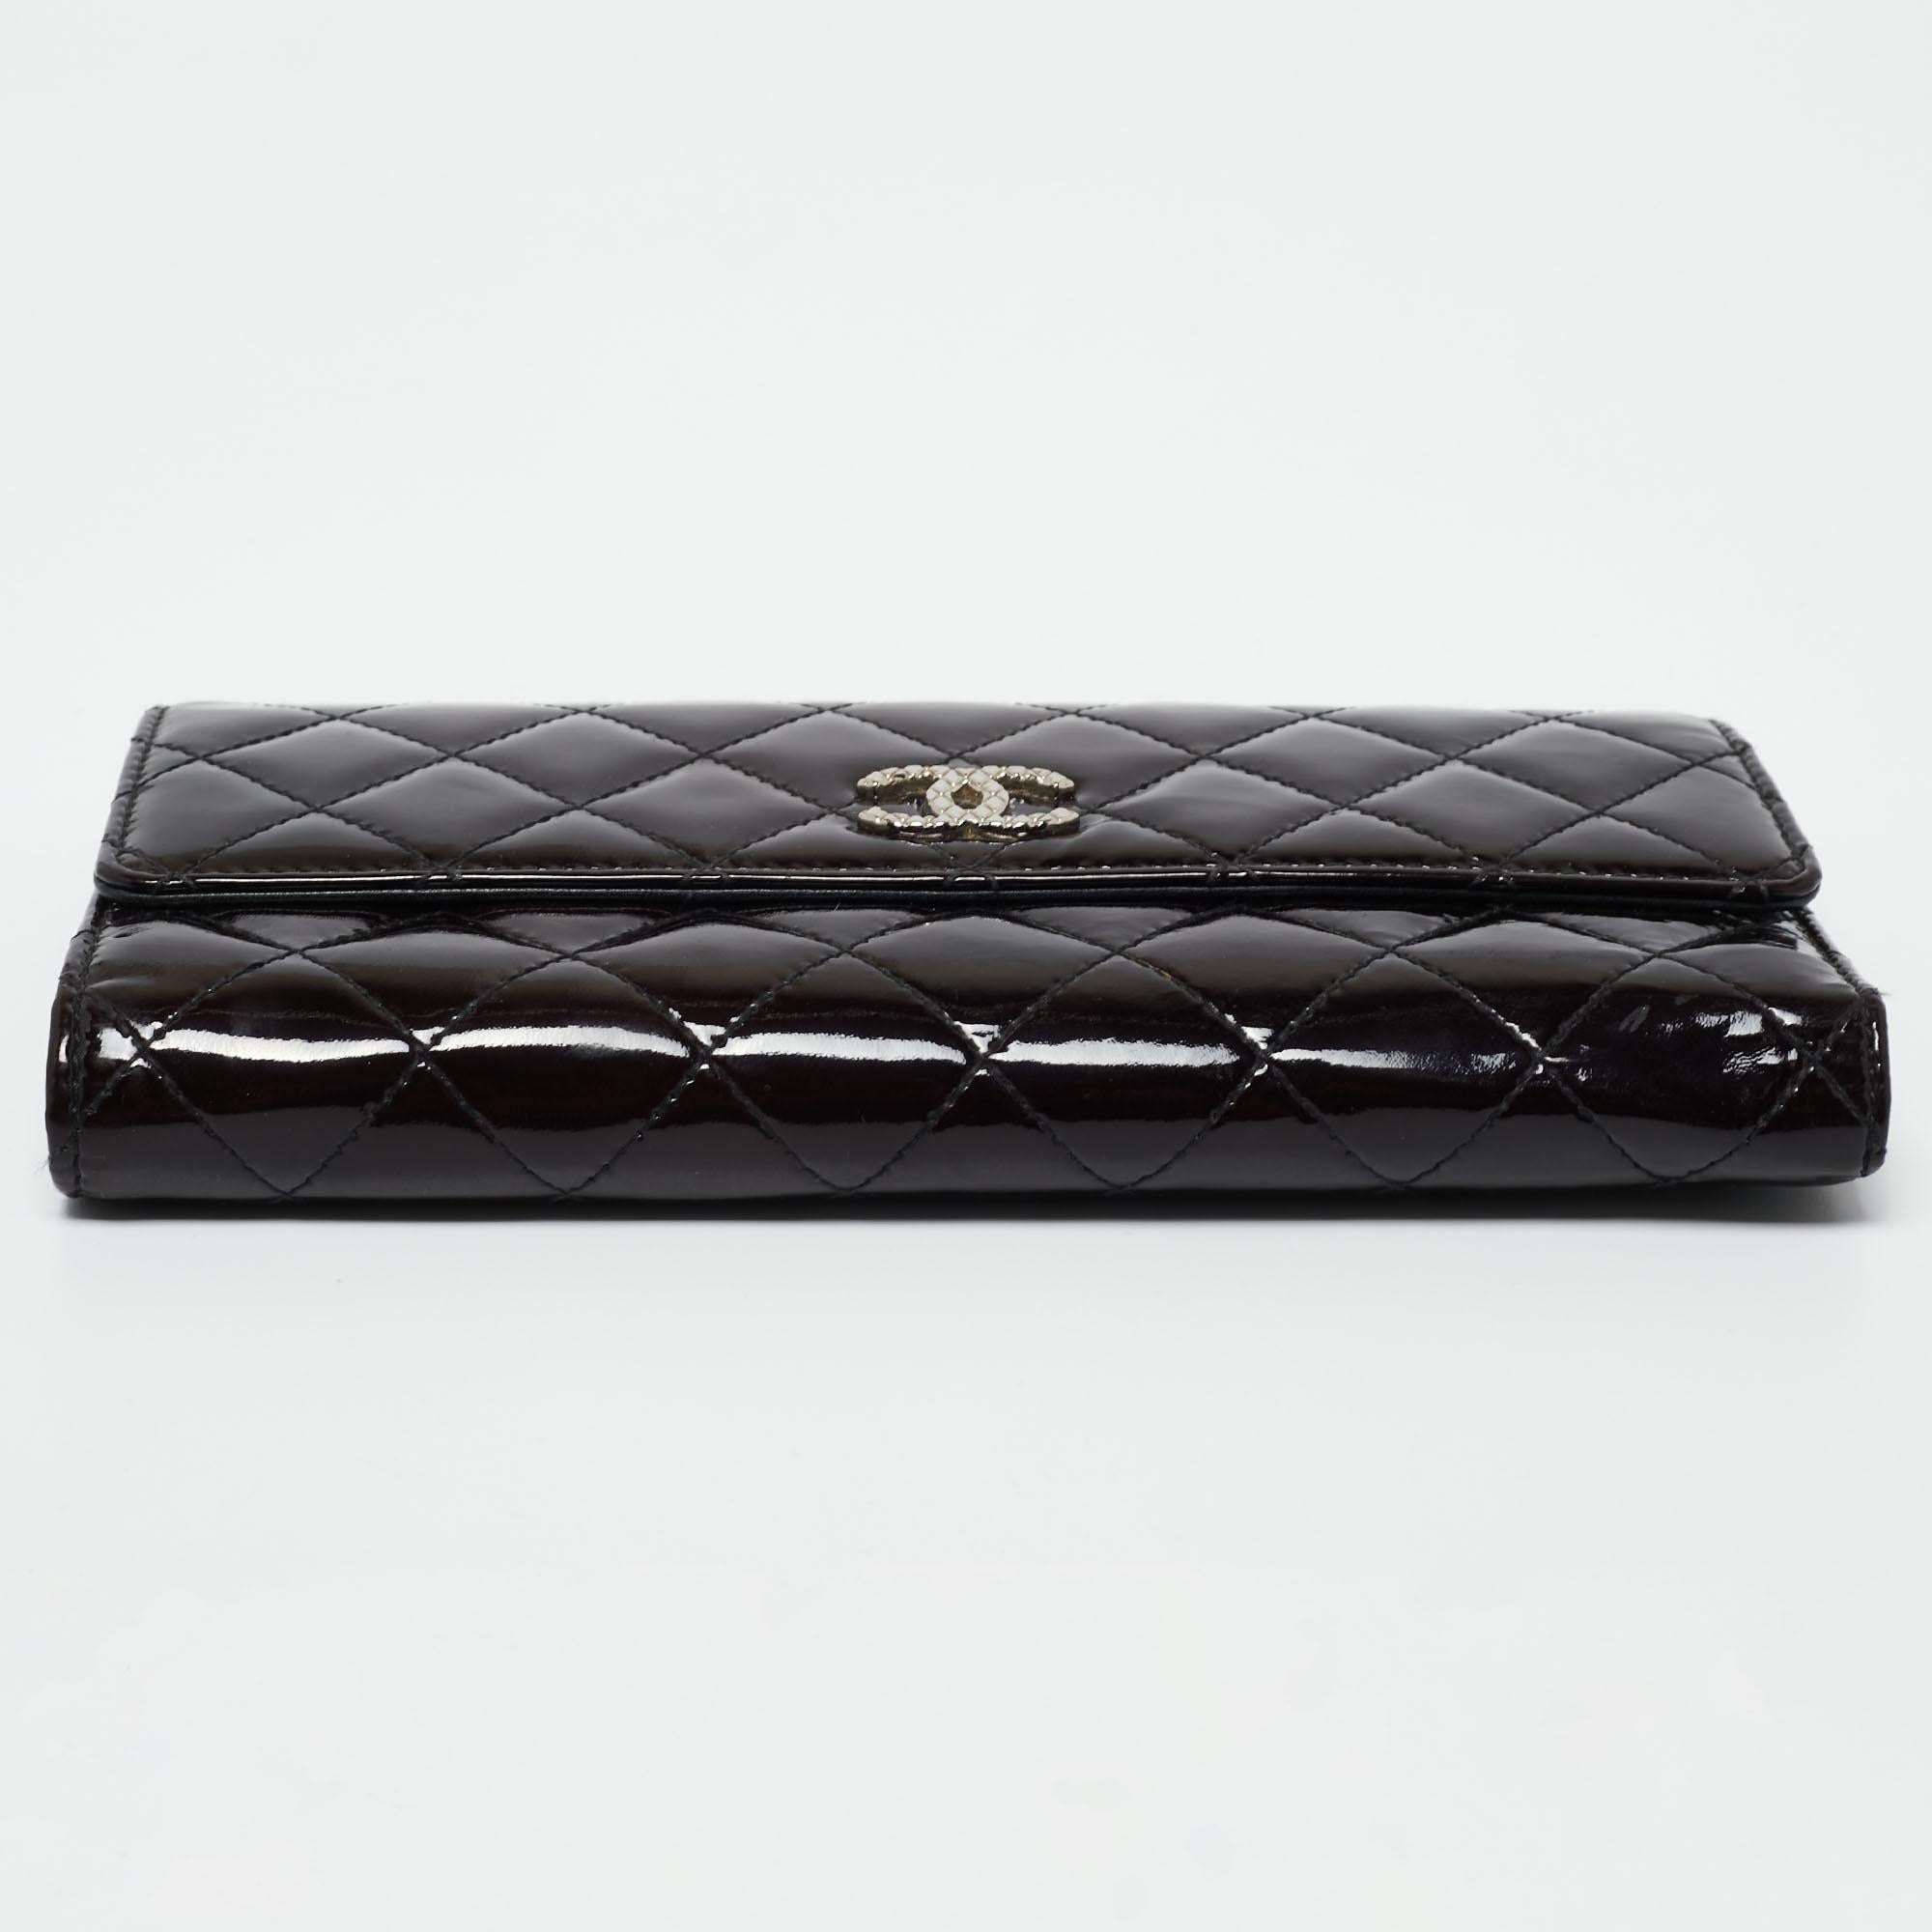 Chanel Black Quilted Patent Leather CC Continental Wallet In Good Condition In Dubai, Al Qouz 2